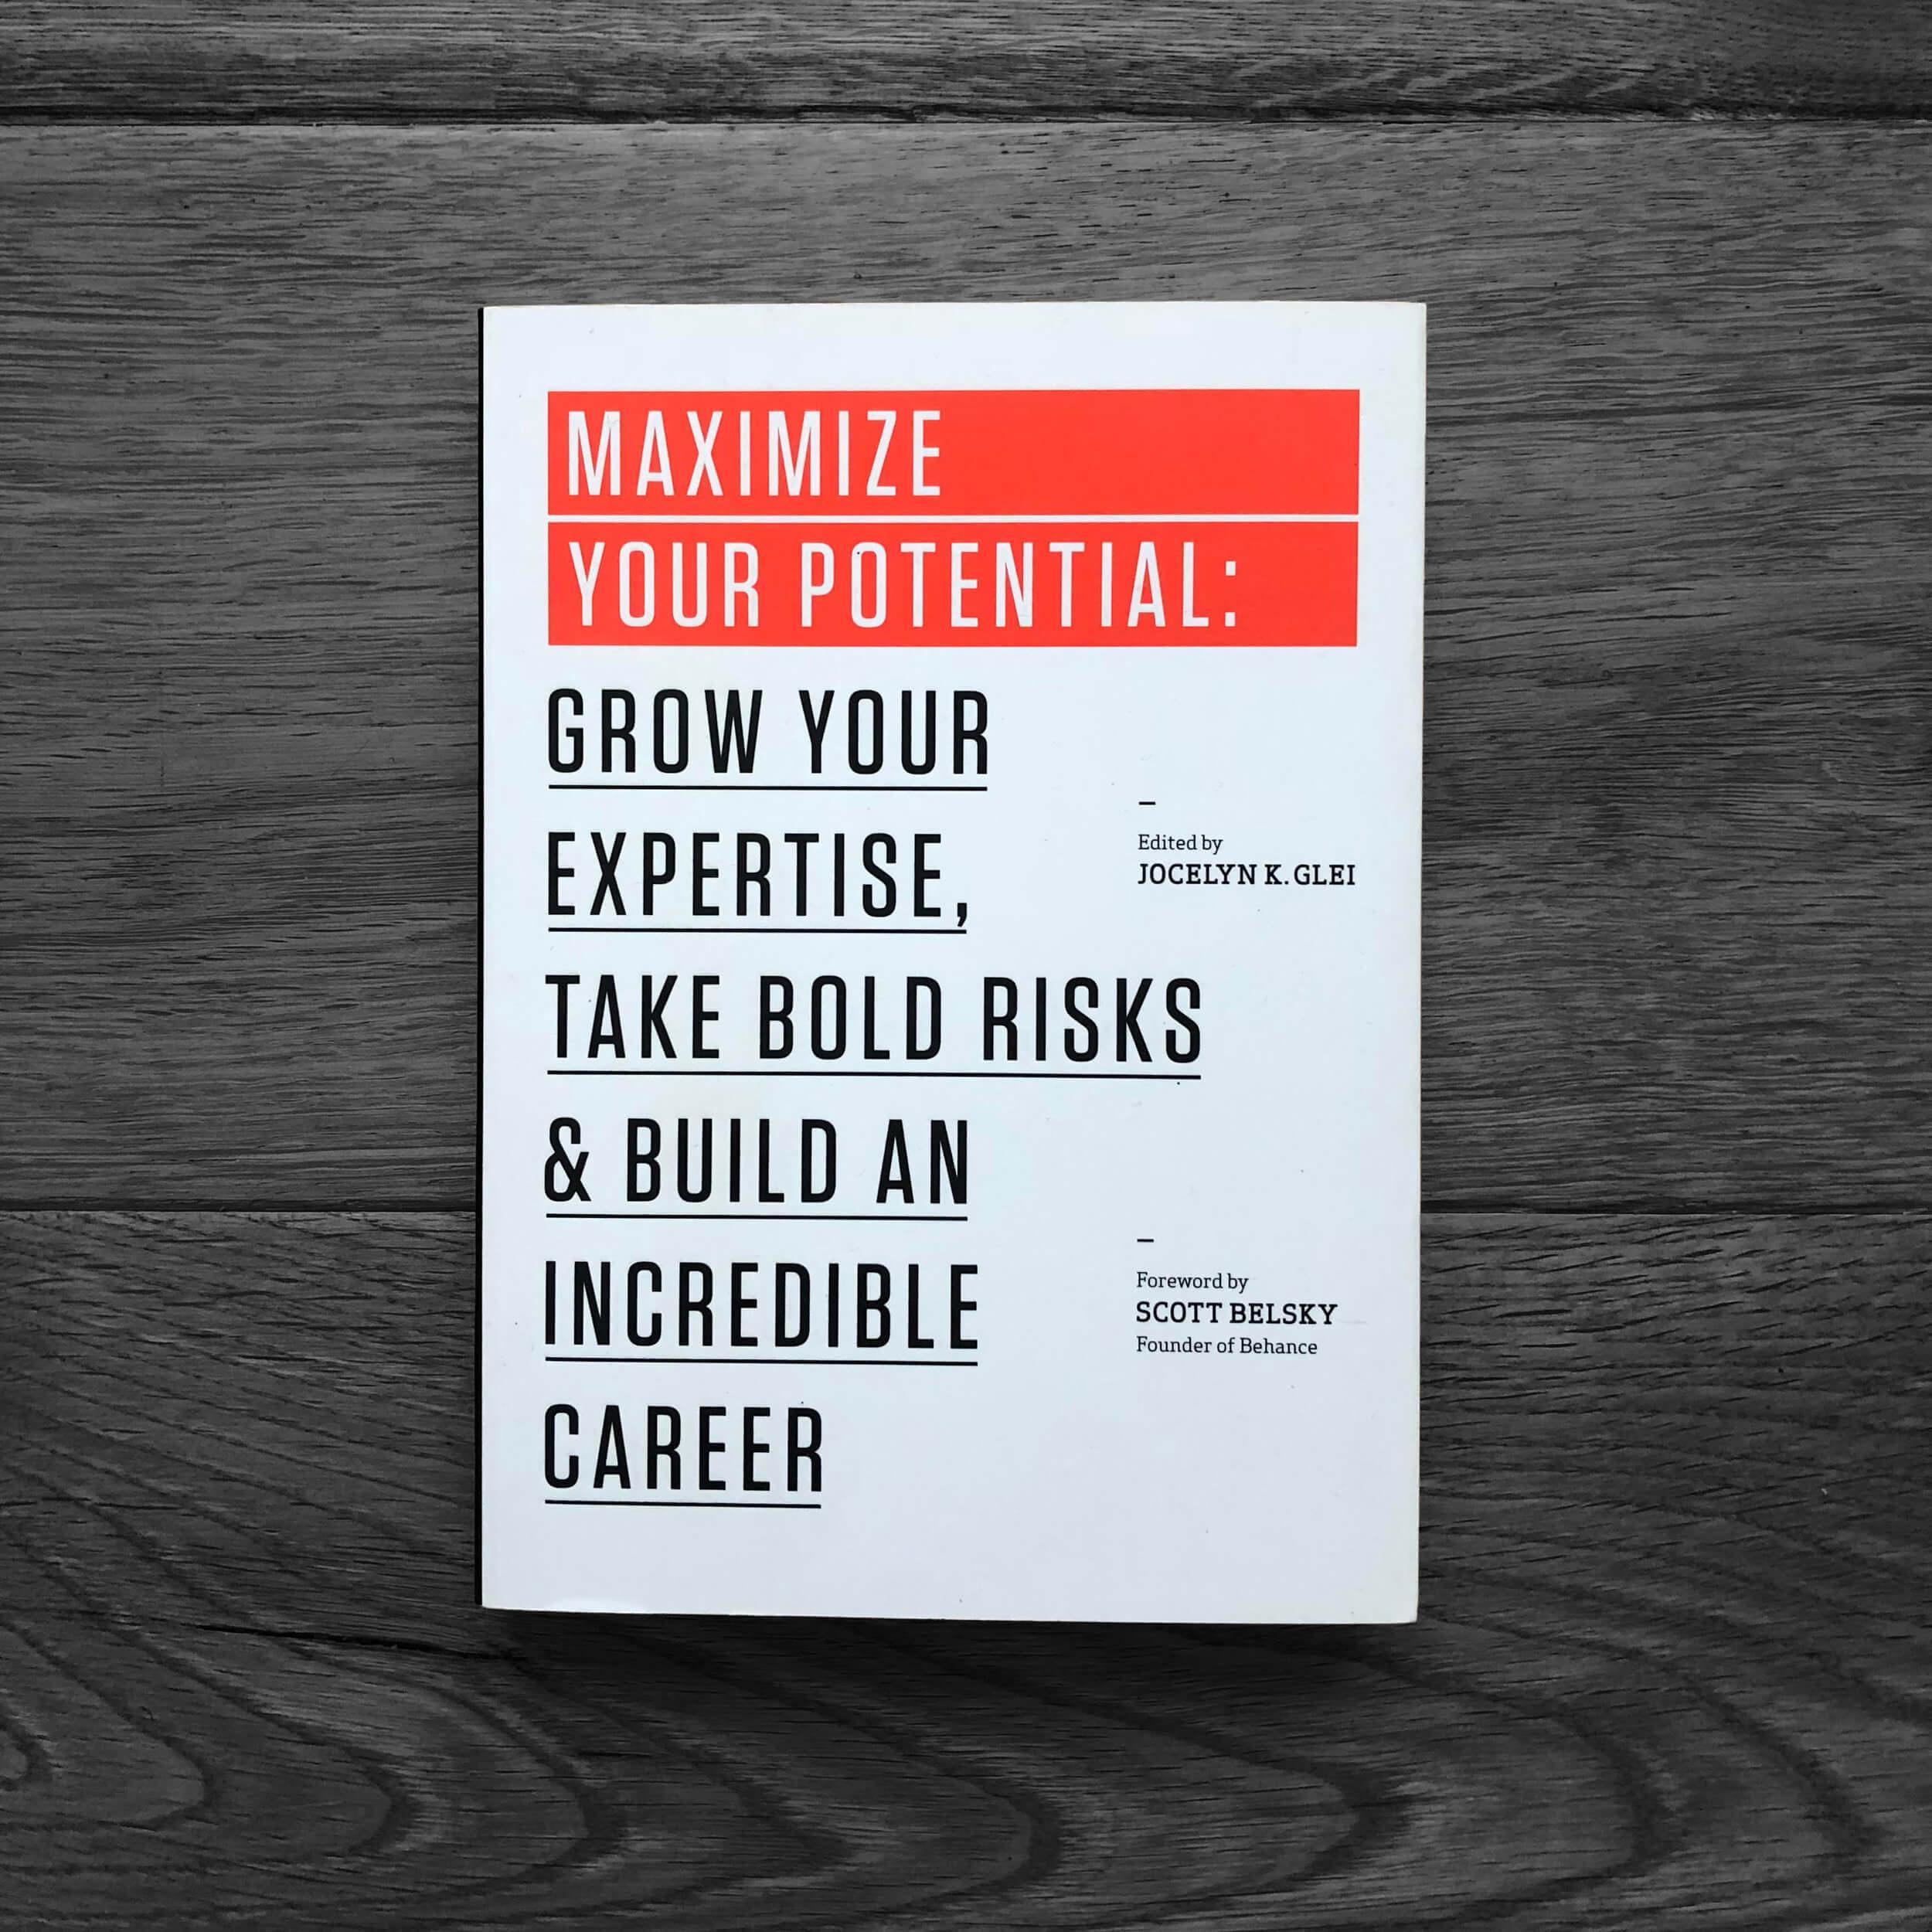 book cover of Scott Belsky and Jocelyn K. Glei's "Maximize Your Potential"